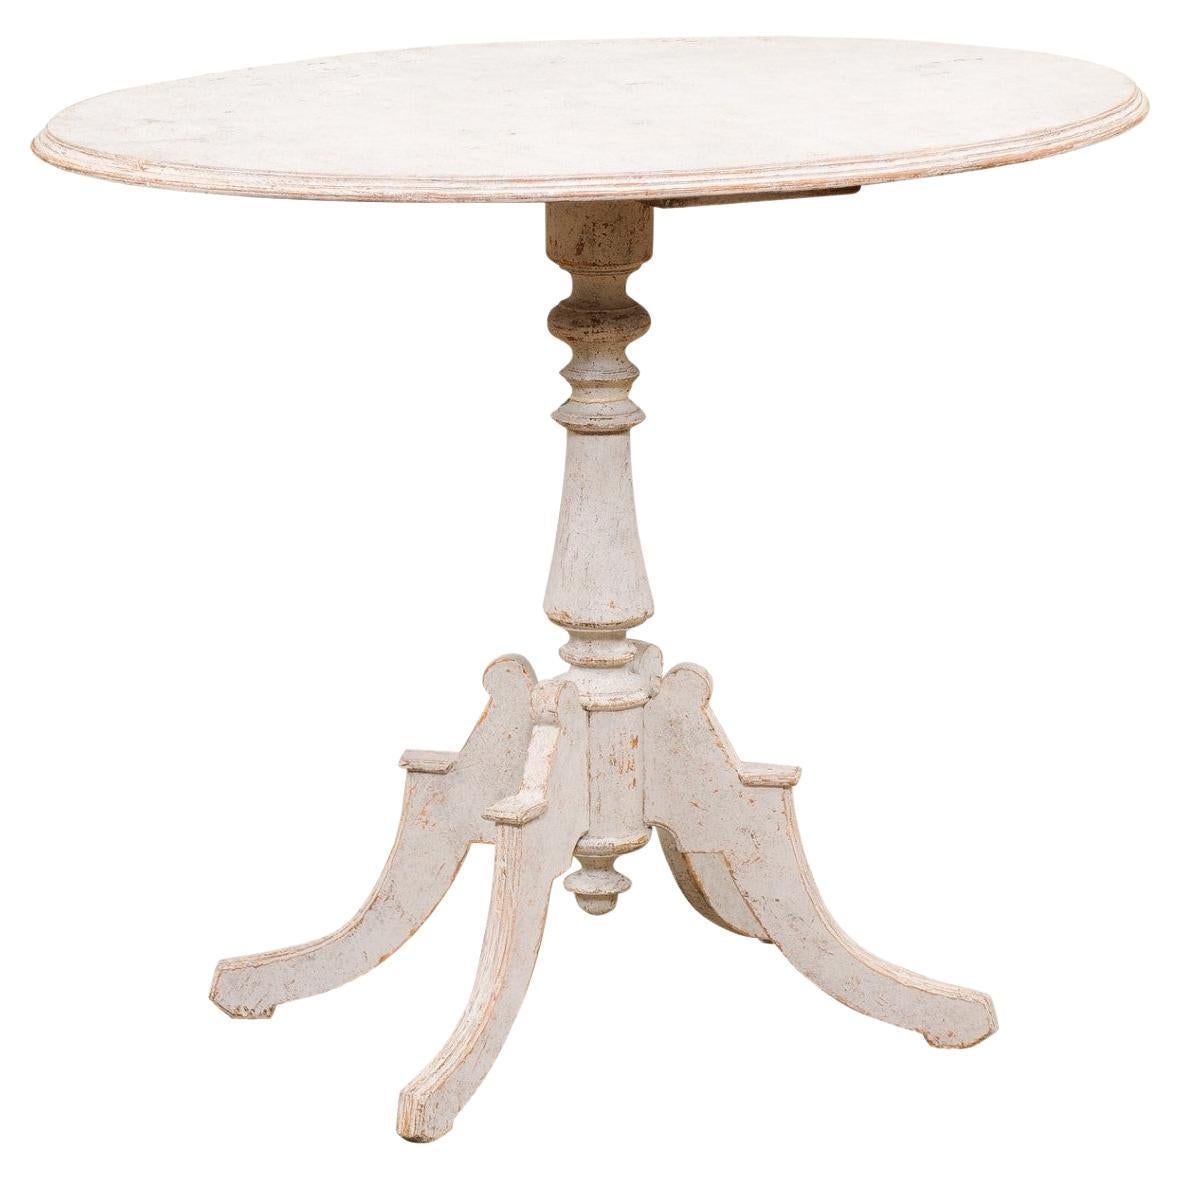 Swedish 1880s Painted Wood Guéridon Table with Oval Top and Pedestal Base For Sale